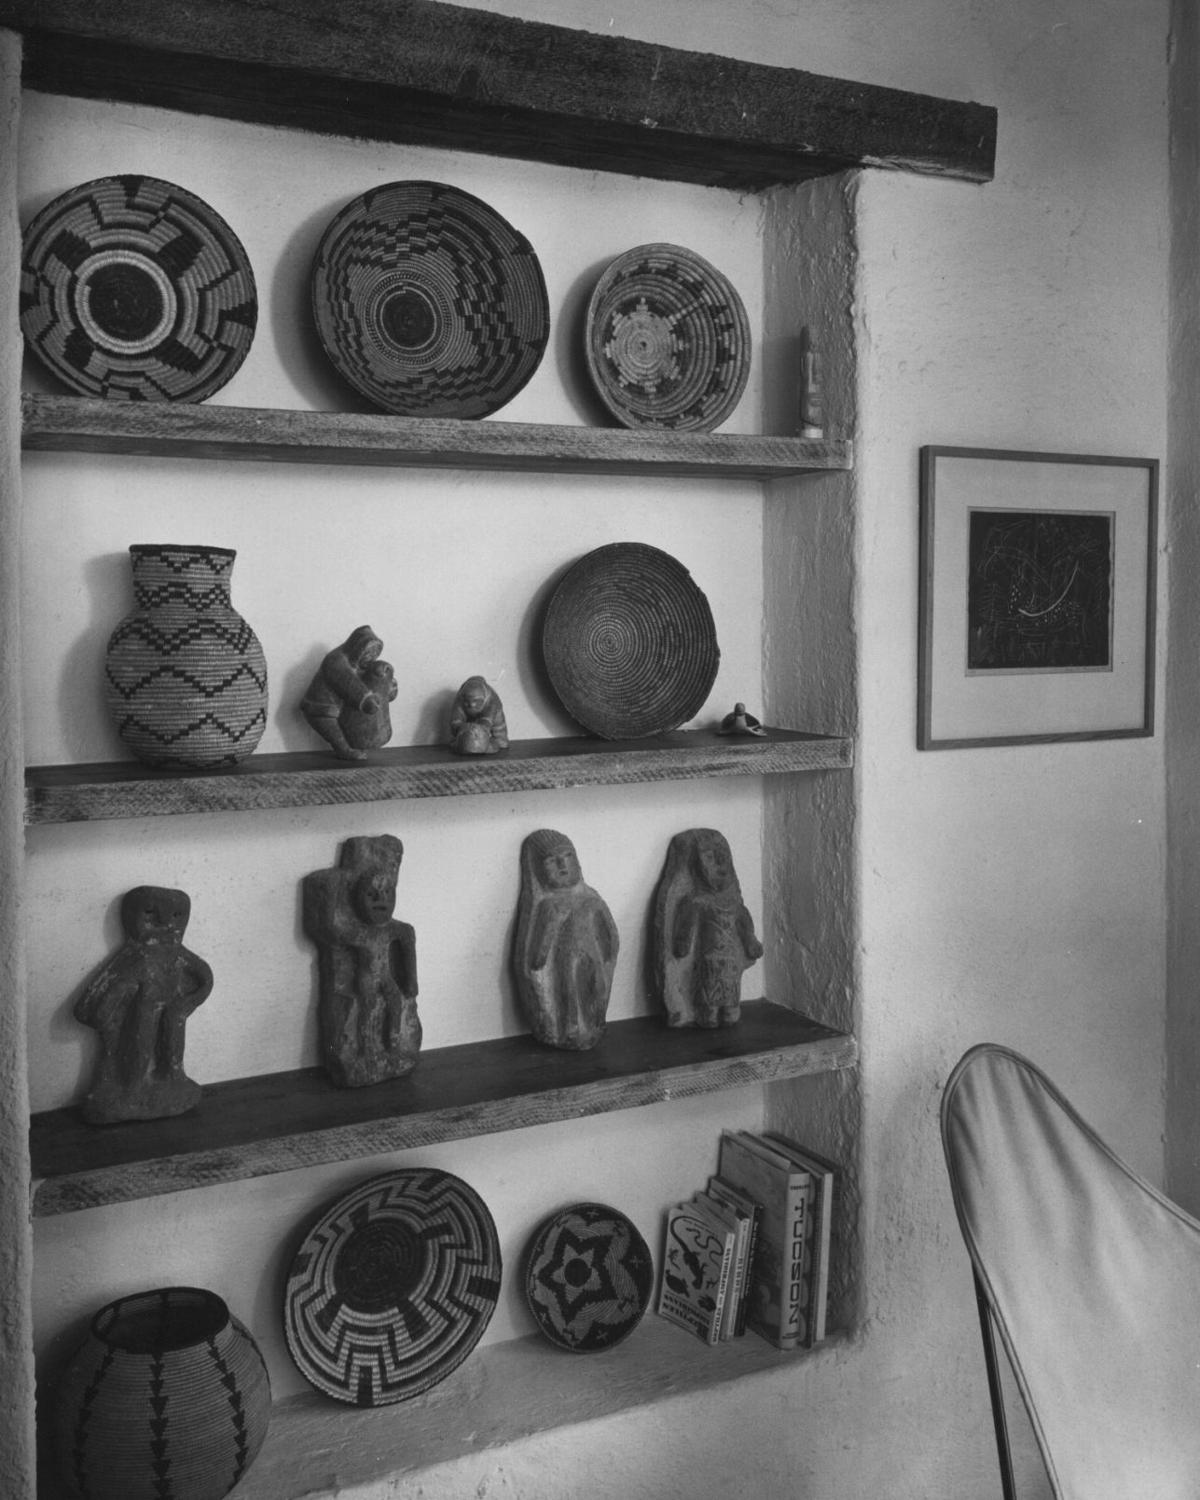 1960: A house perfect for Indian art